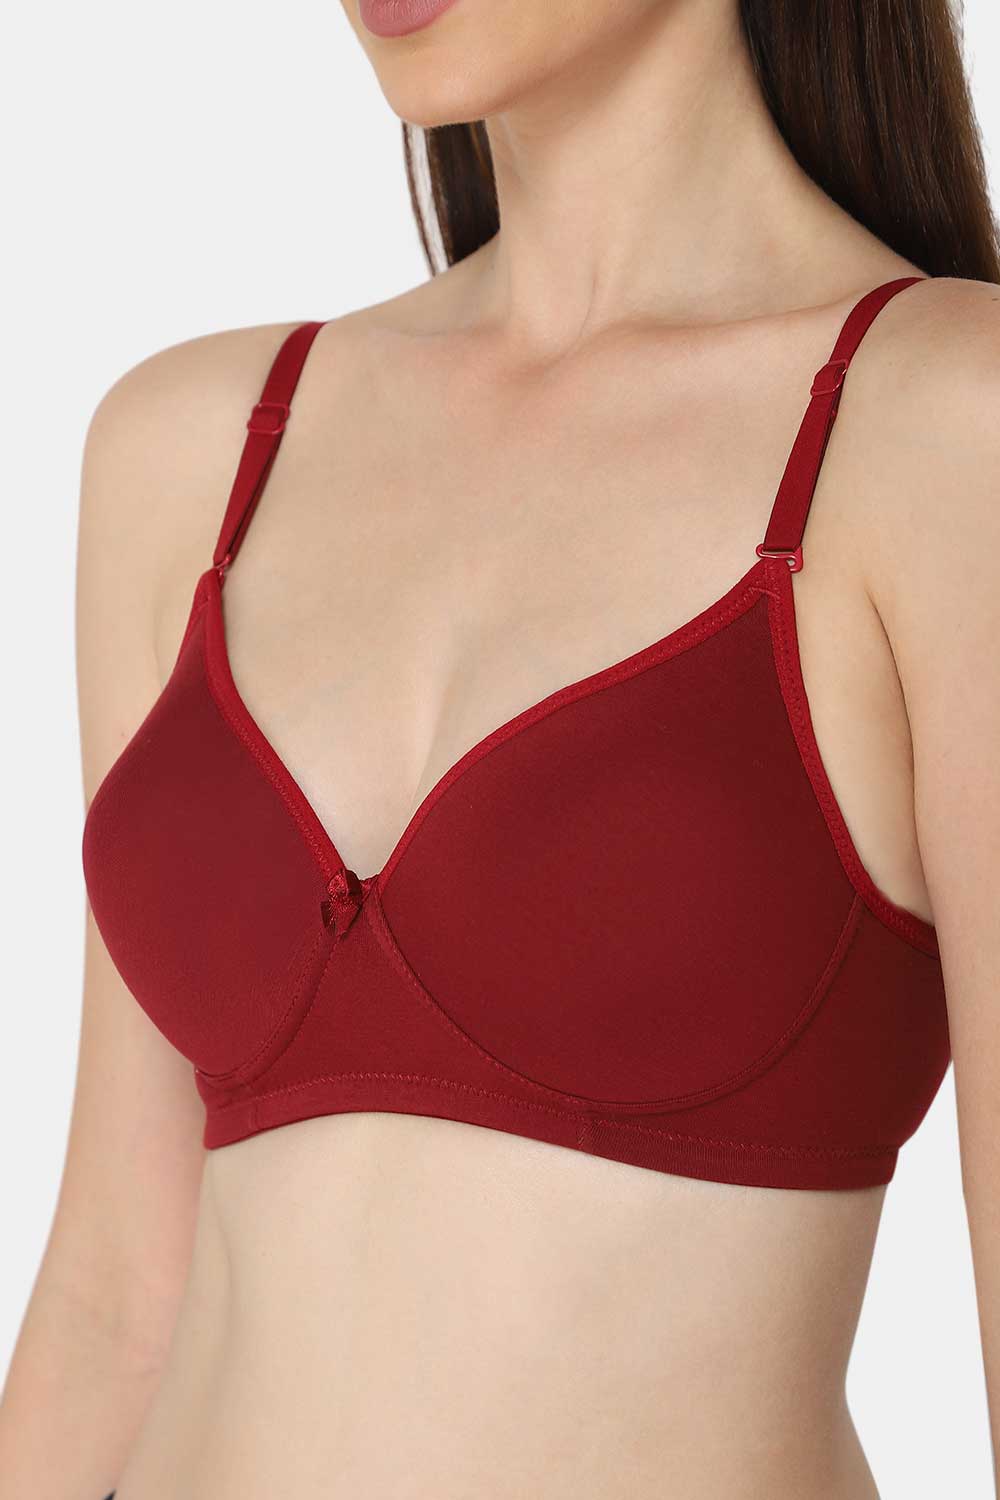 Intimacy Medium Coverage Non-Wired Thin & Adjustable T-Shirt Padded Bra- Red